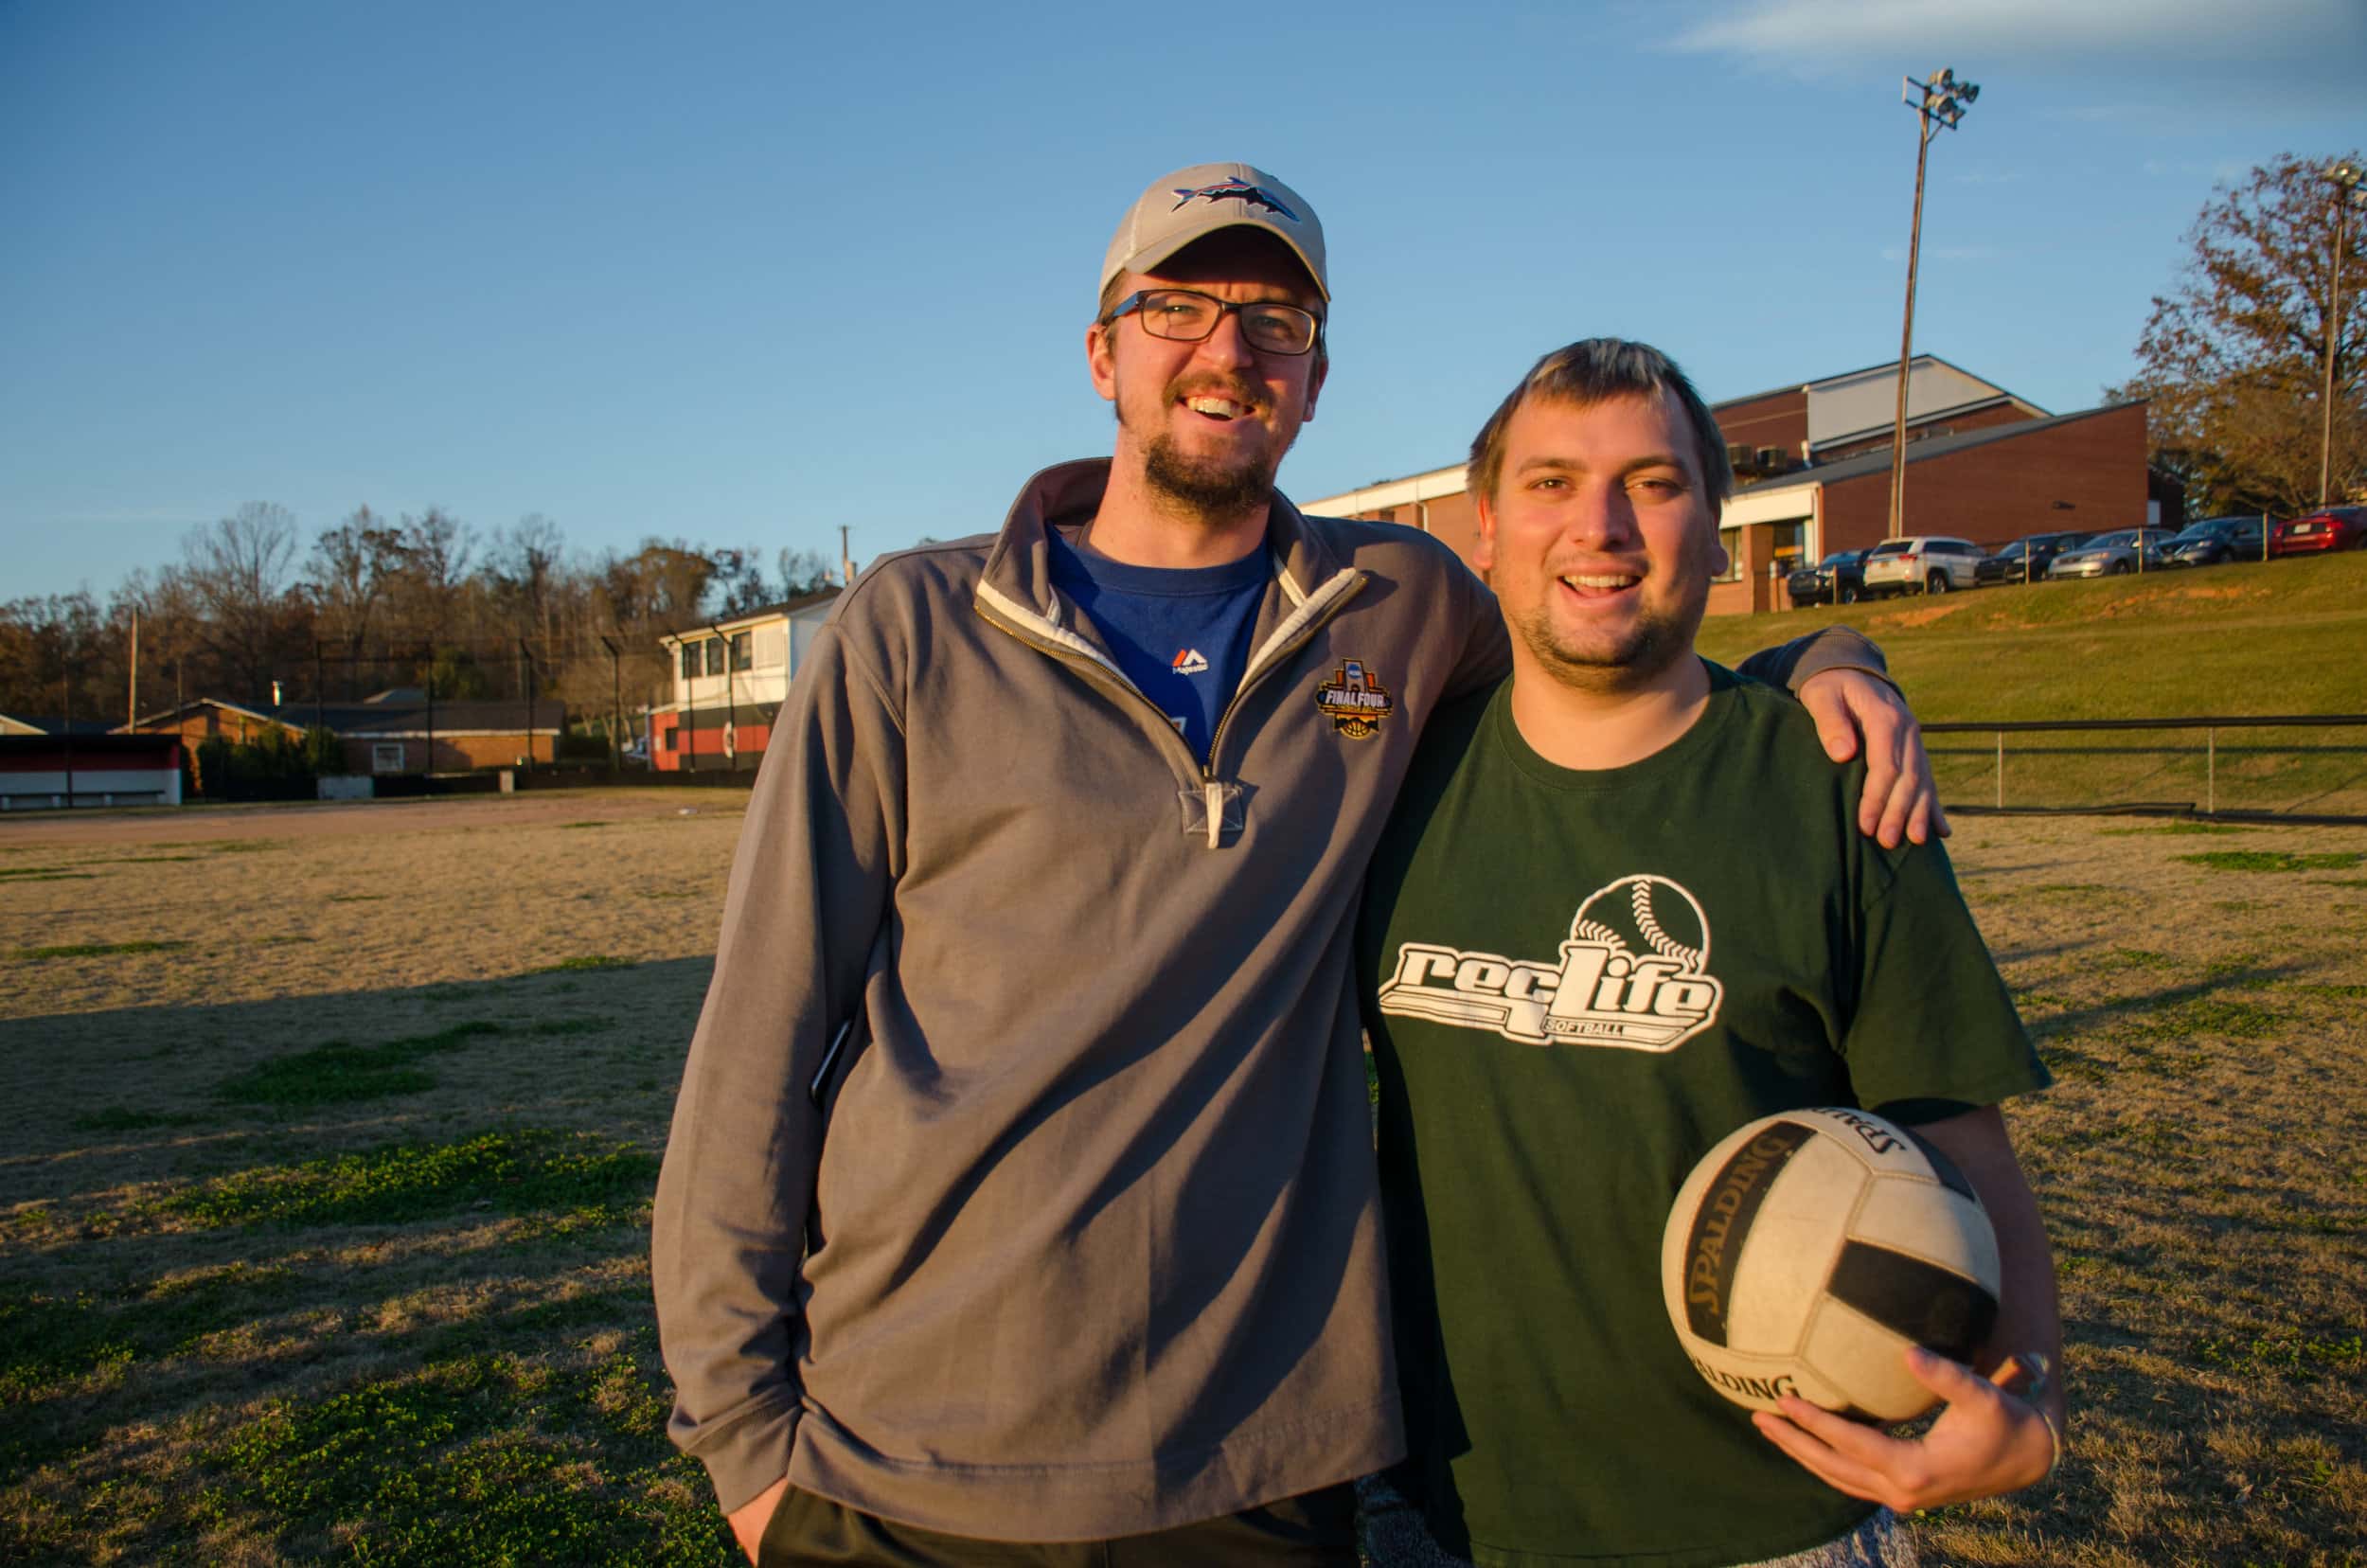 Bryce Allen, junior sport ministry major, "I'm thankful for Brent because he's a good friend."Brent Simmons, junior sport ministry major, "I'm thankful for nature because it's beautiful."